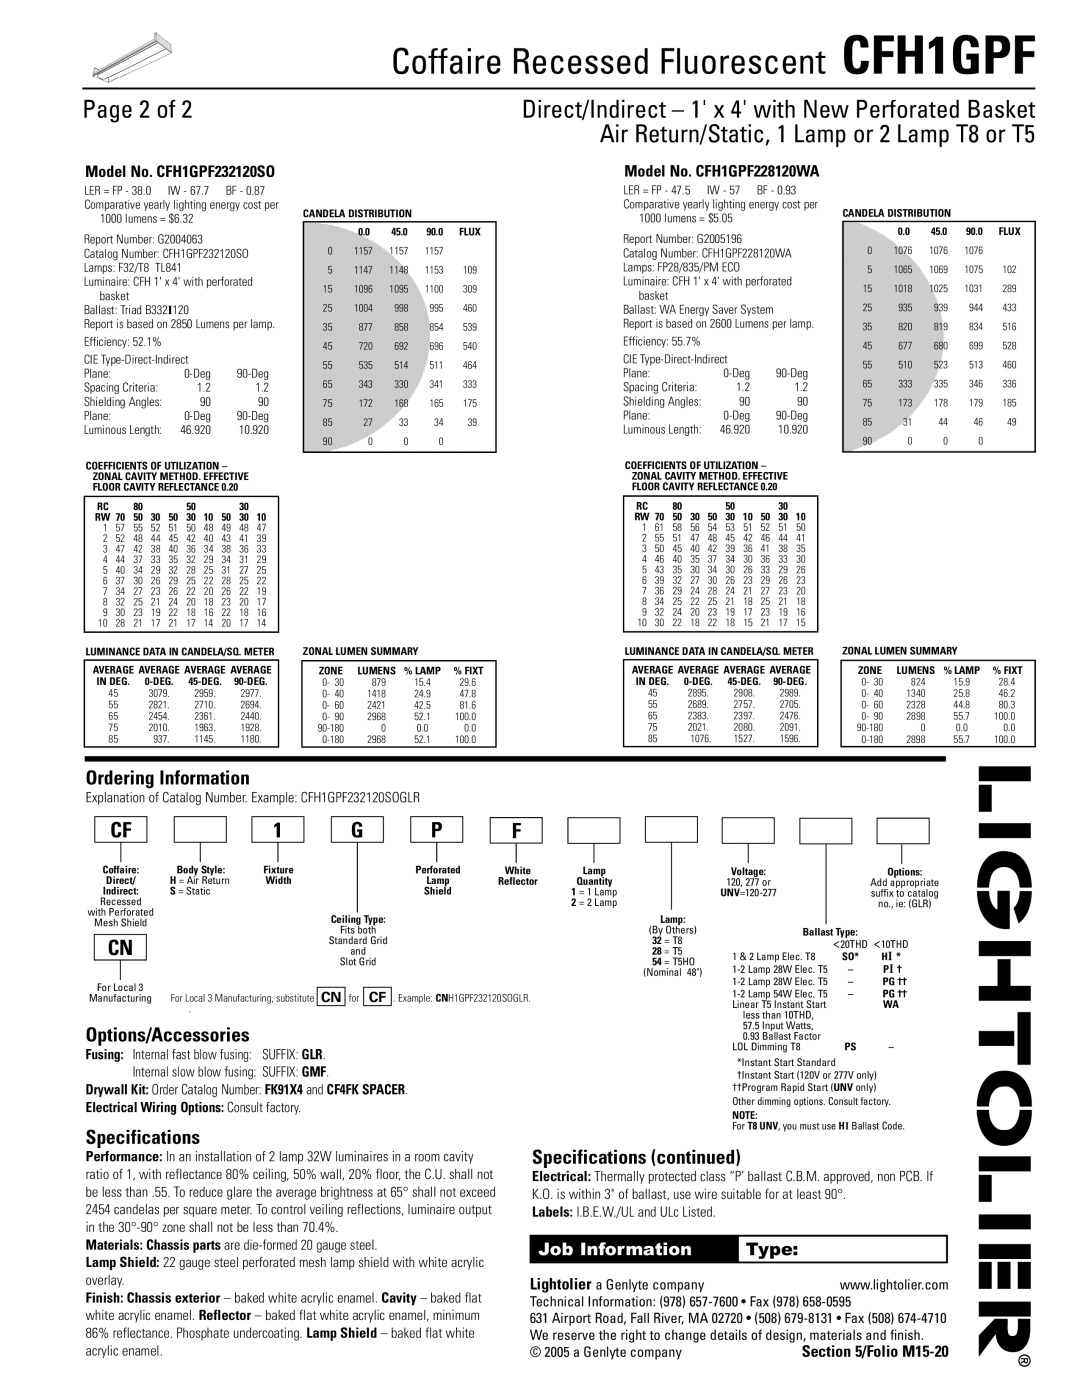 Lightolier CFH1GPF dimensions Page 2 of, Ordering Information, Specifications continued, Job Information, Type 